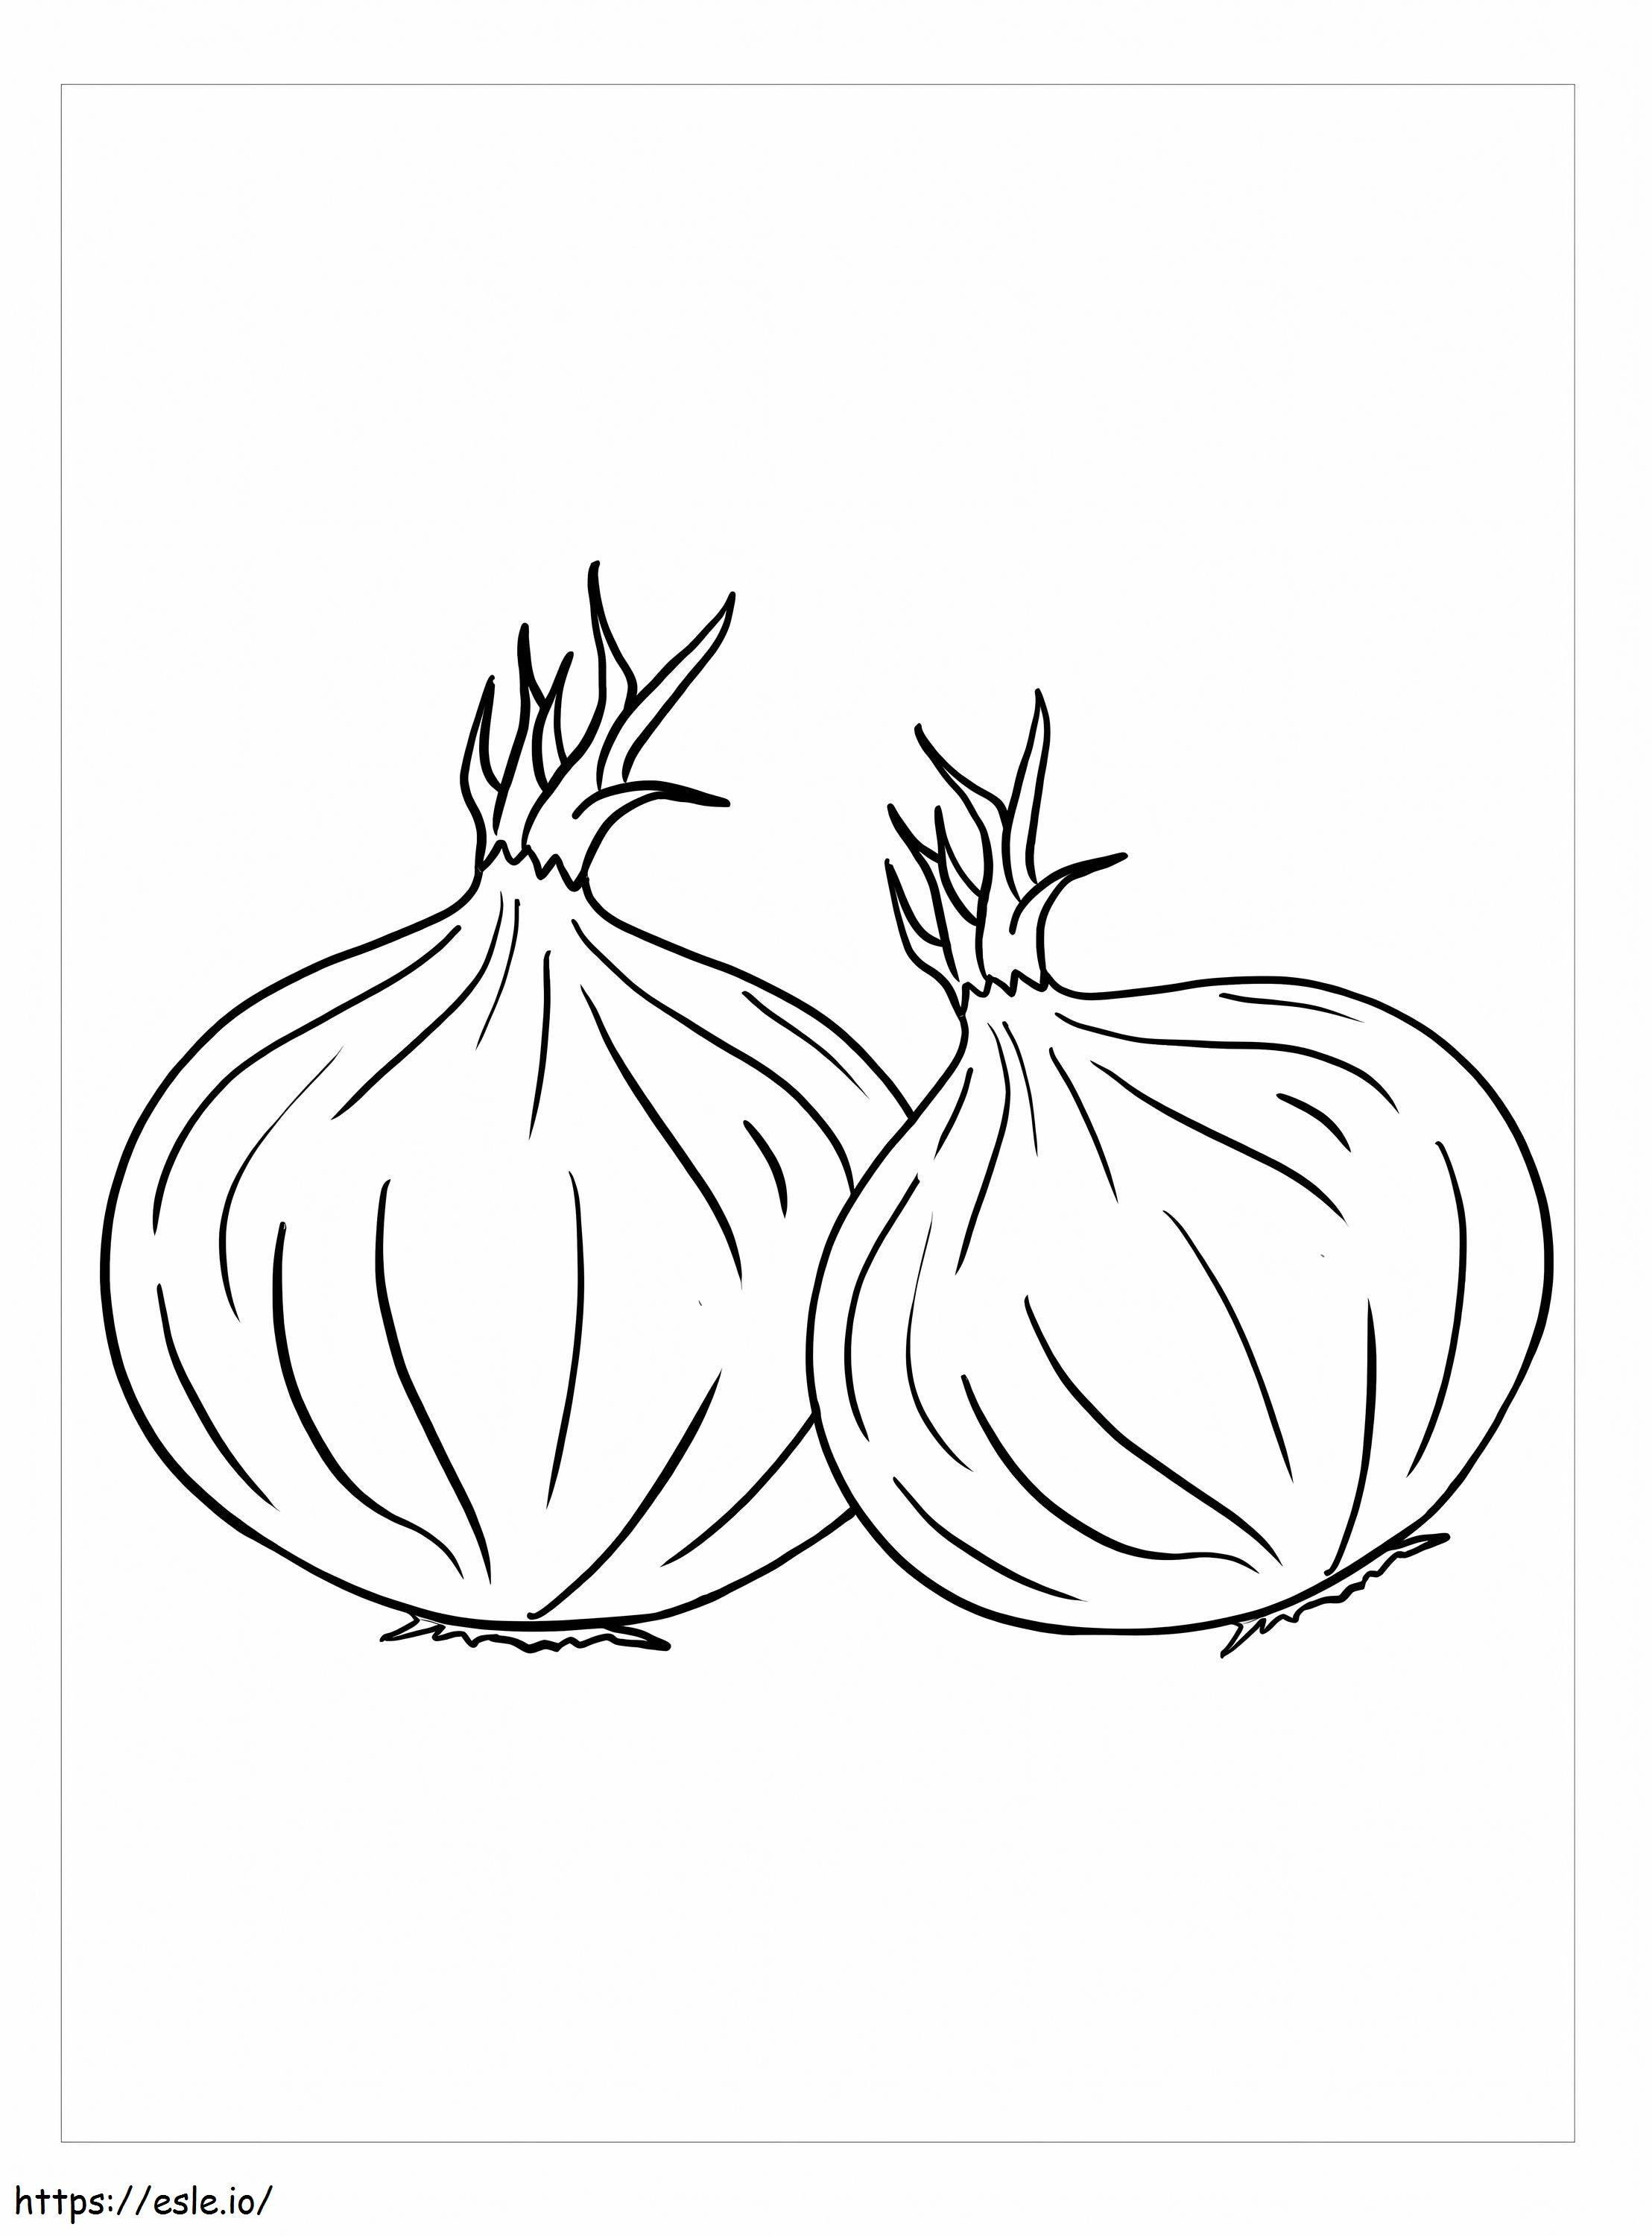 Two Basic Onions coloring page